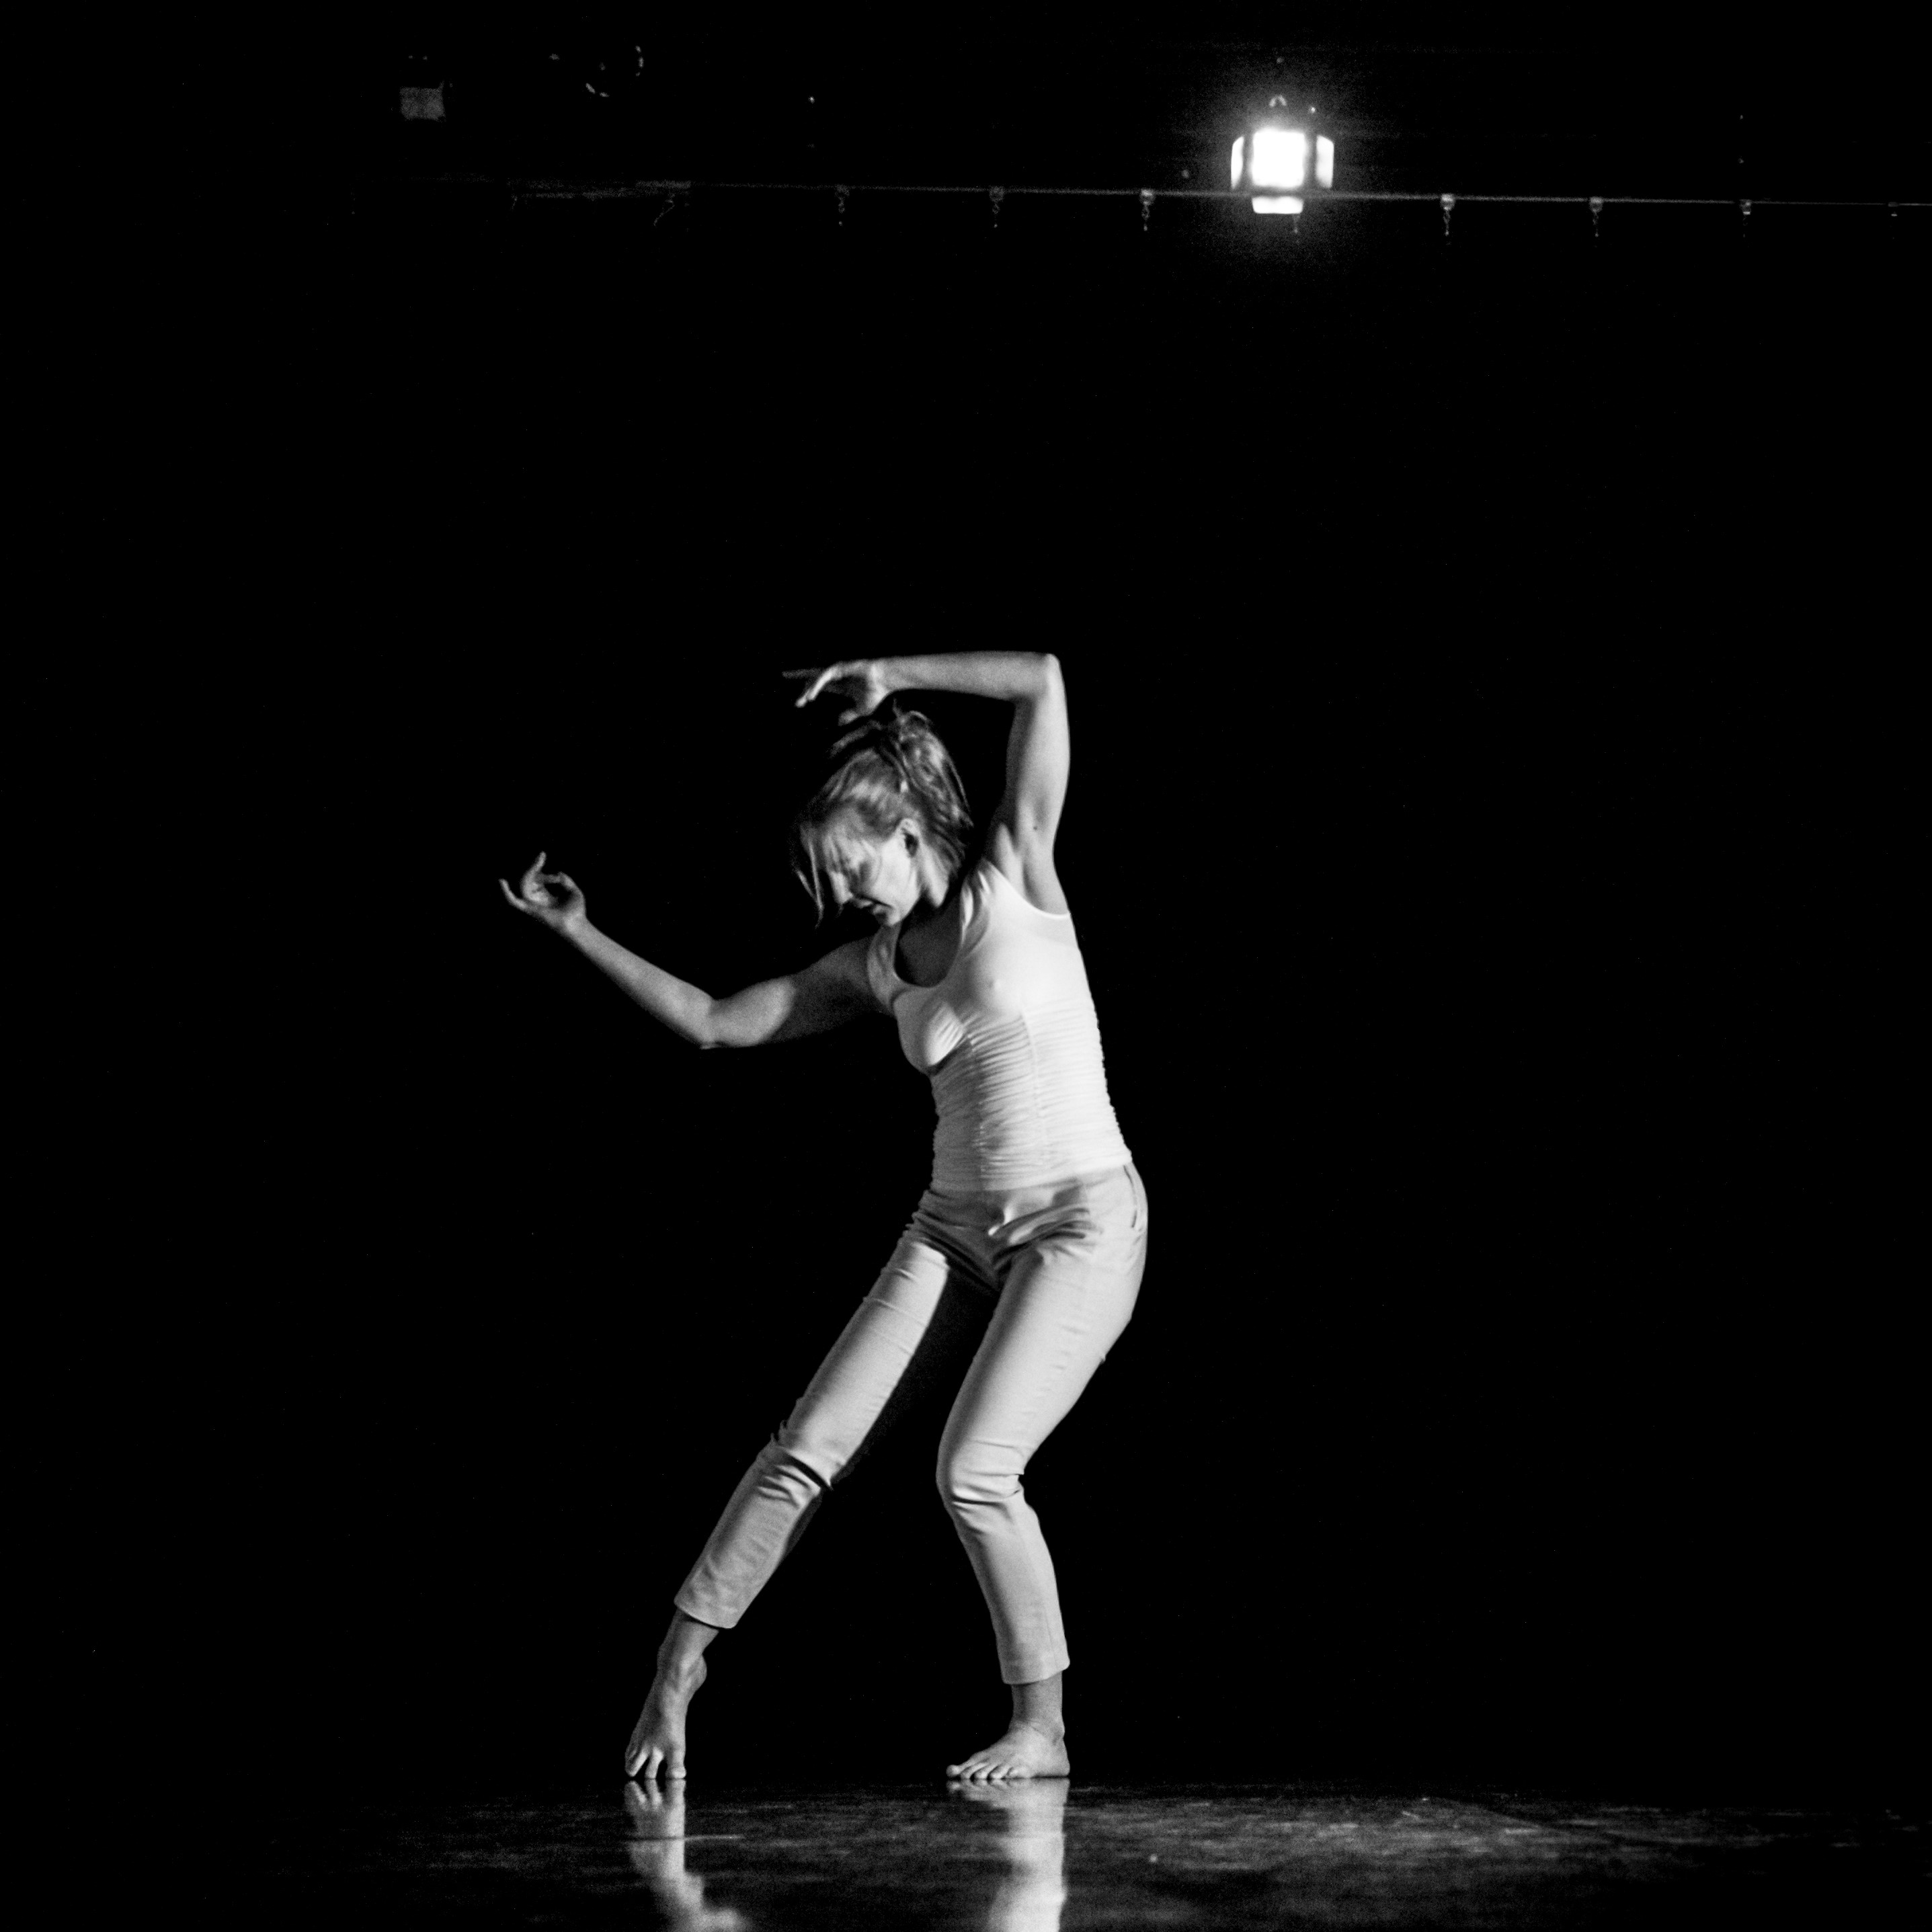 Krista Solheim - Black and white shot of woman dancing with dark background.